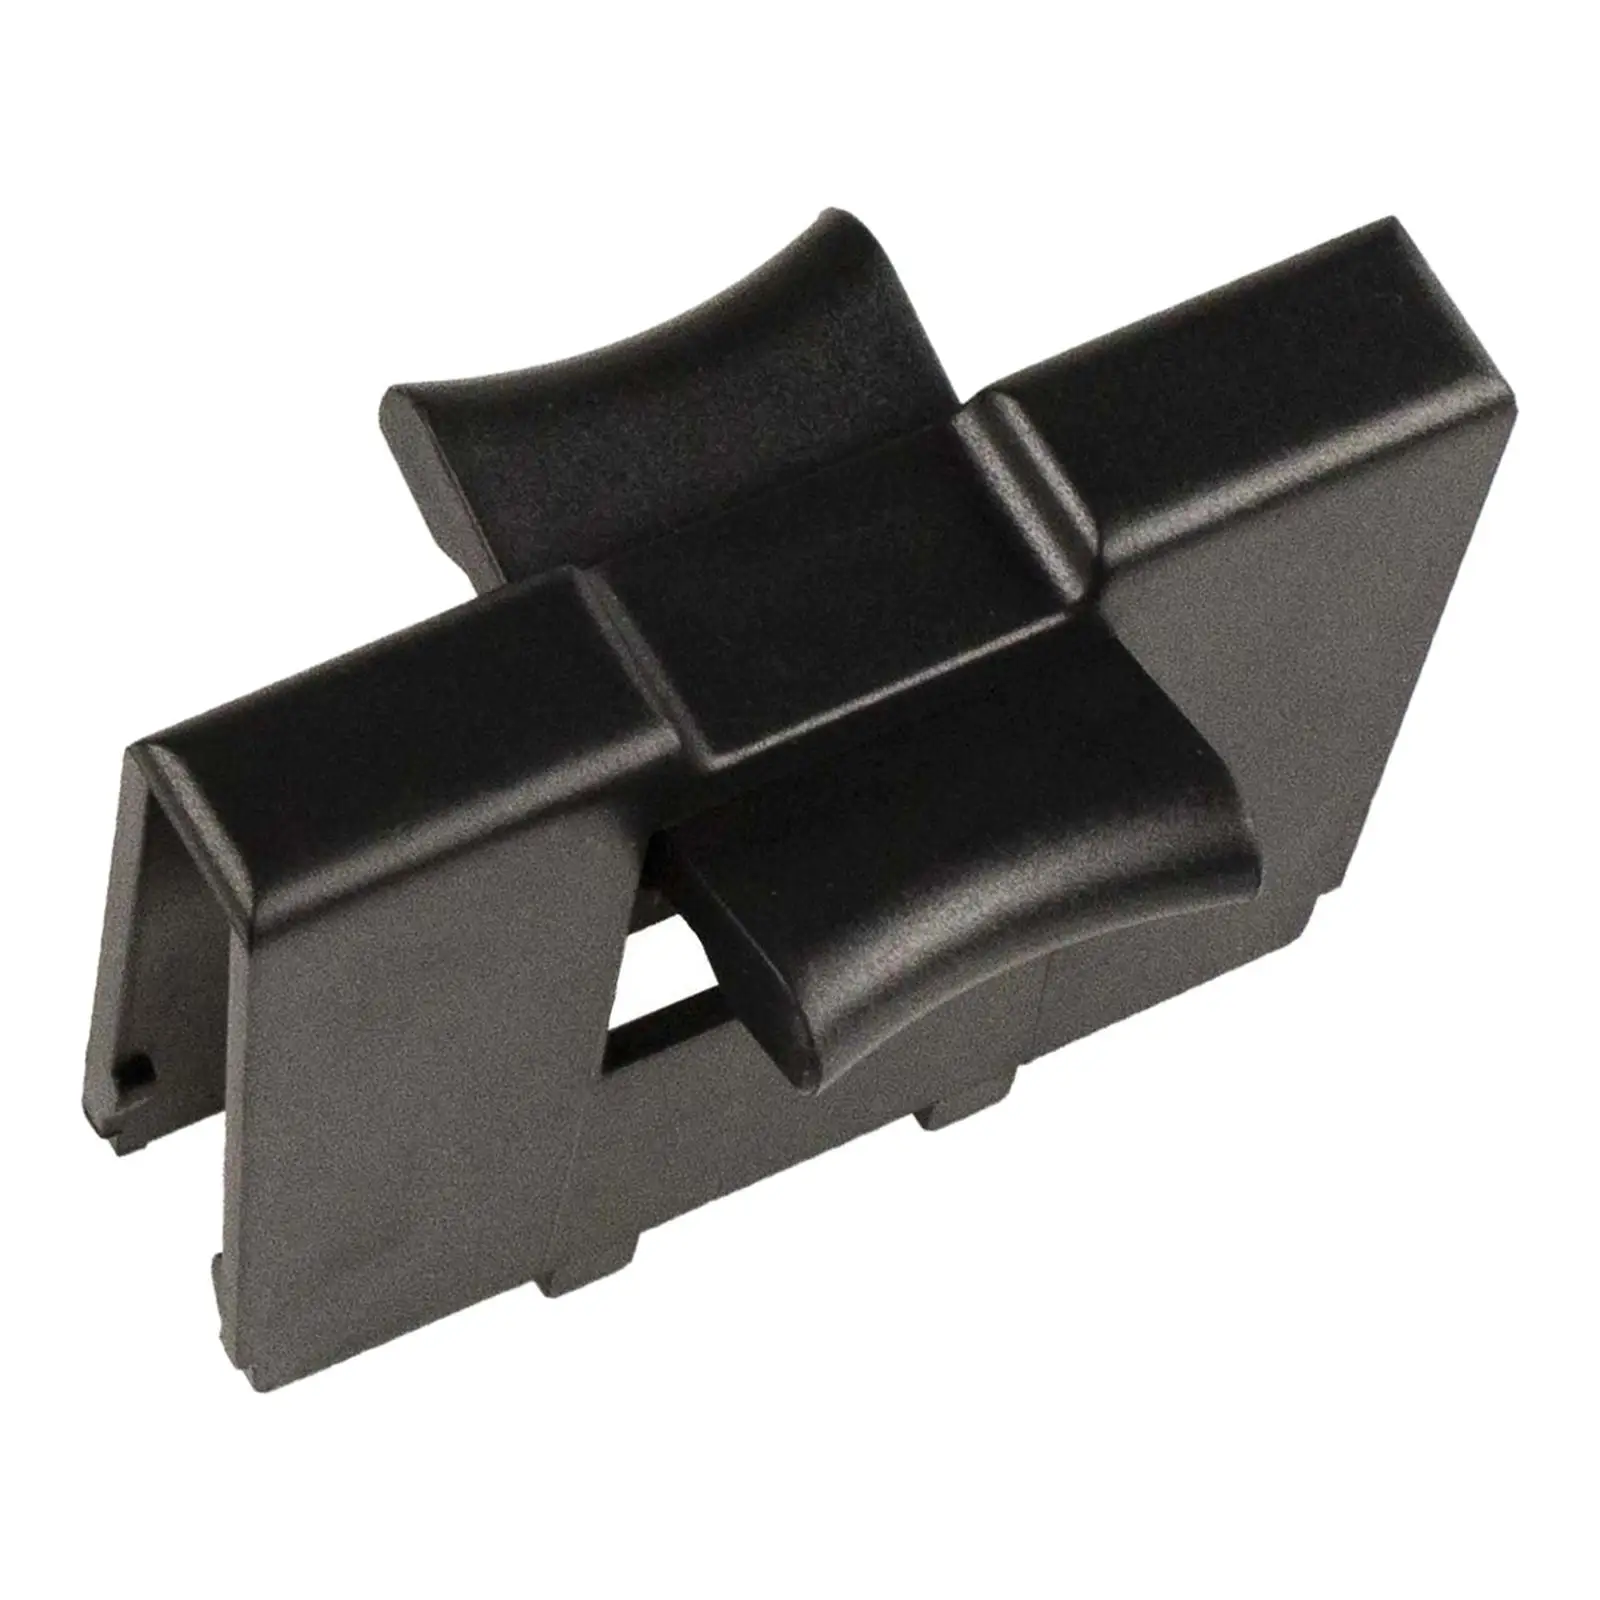 92118Aj000 Foldable center Console Cup Holder Insert Divider Replacement